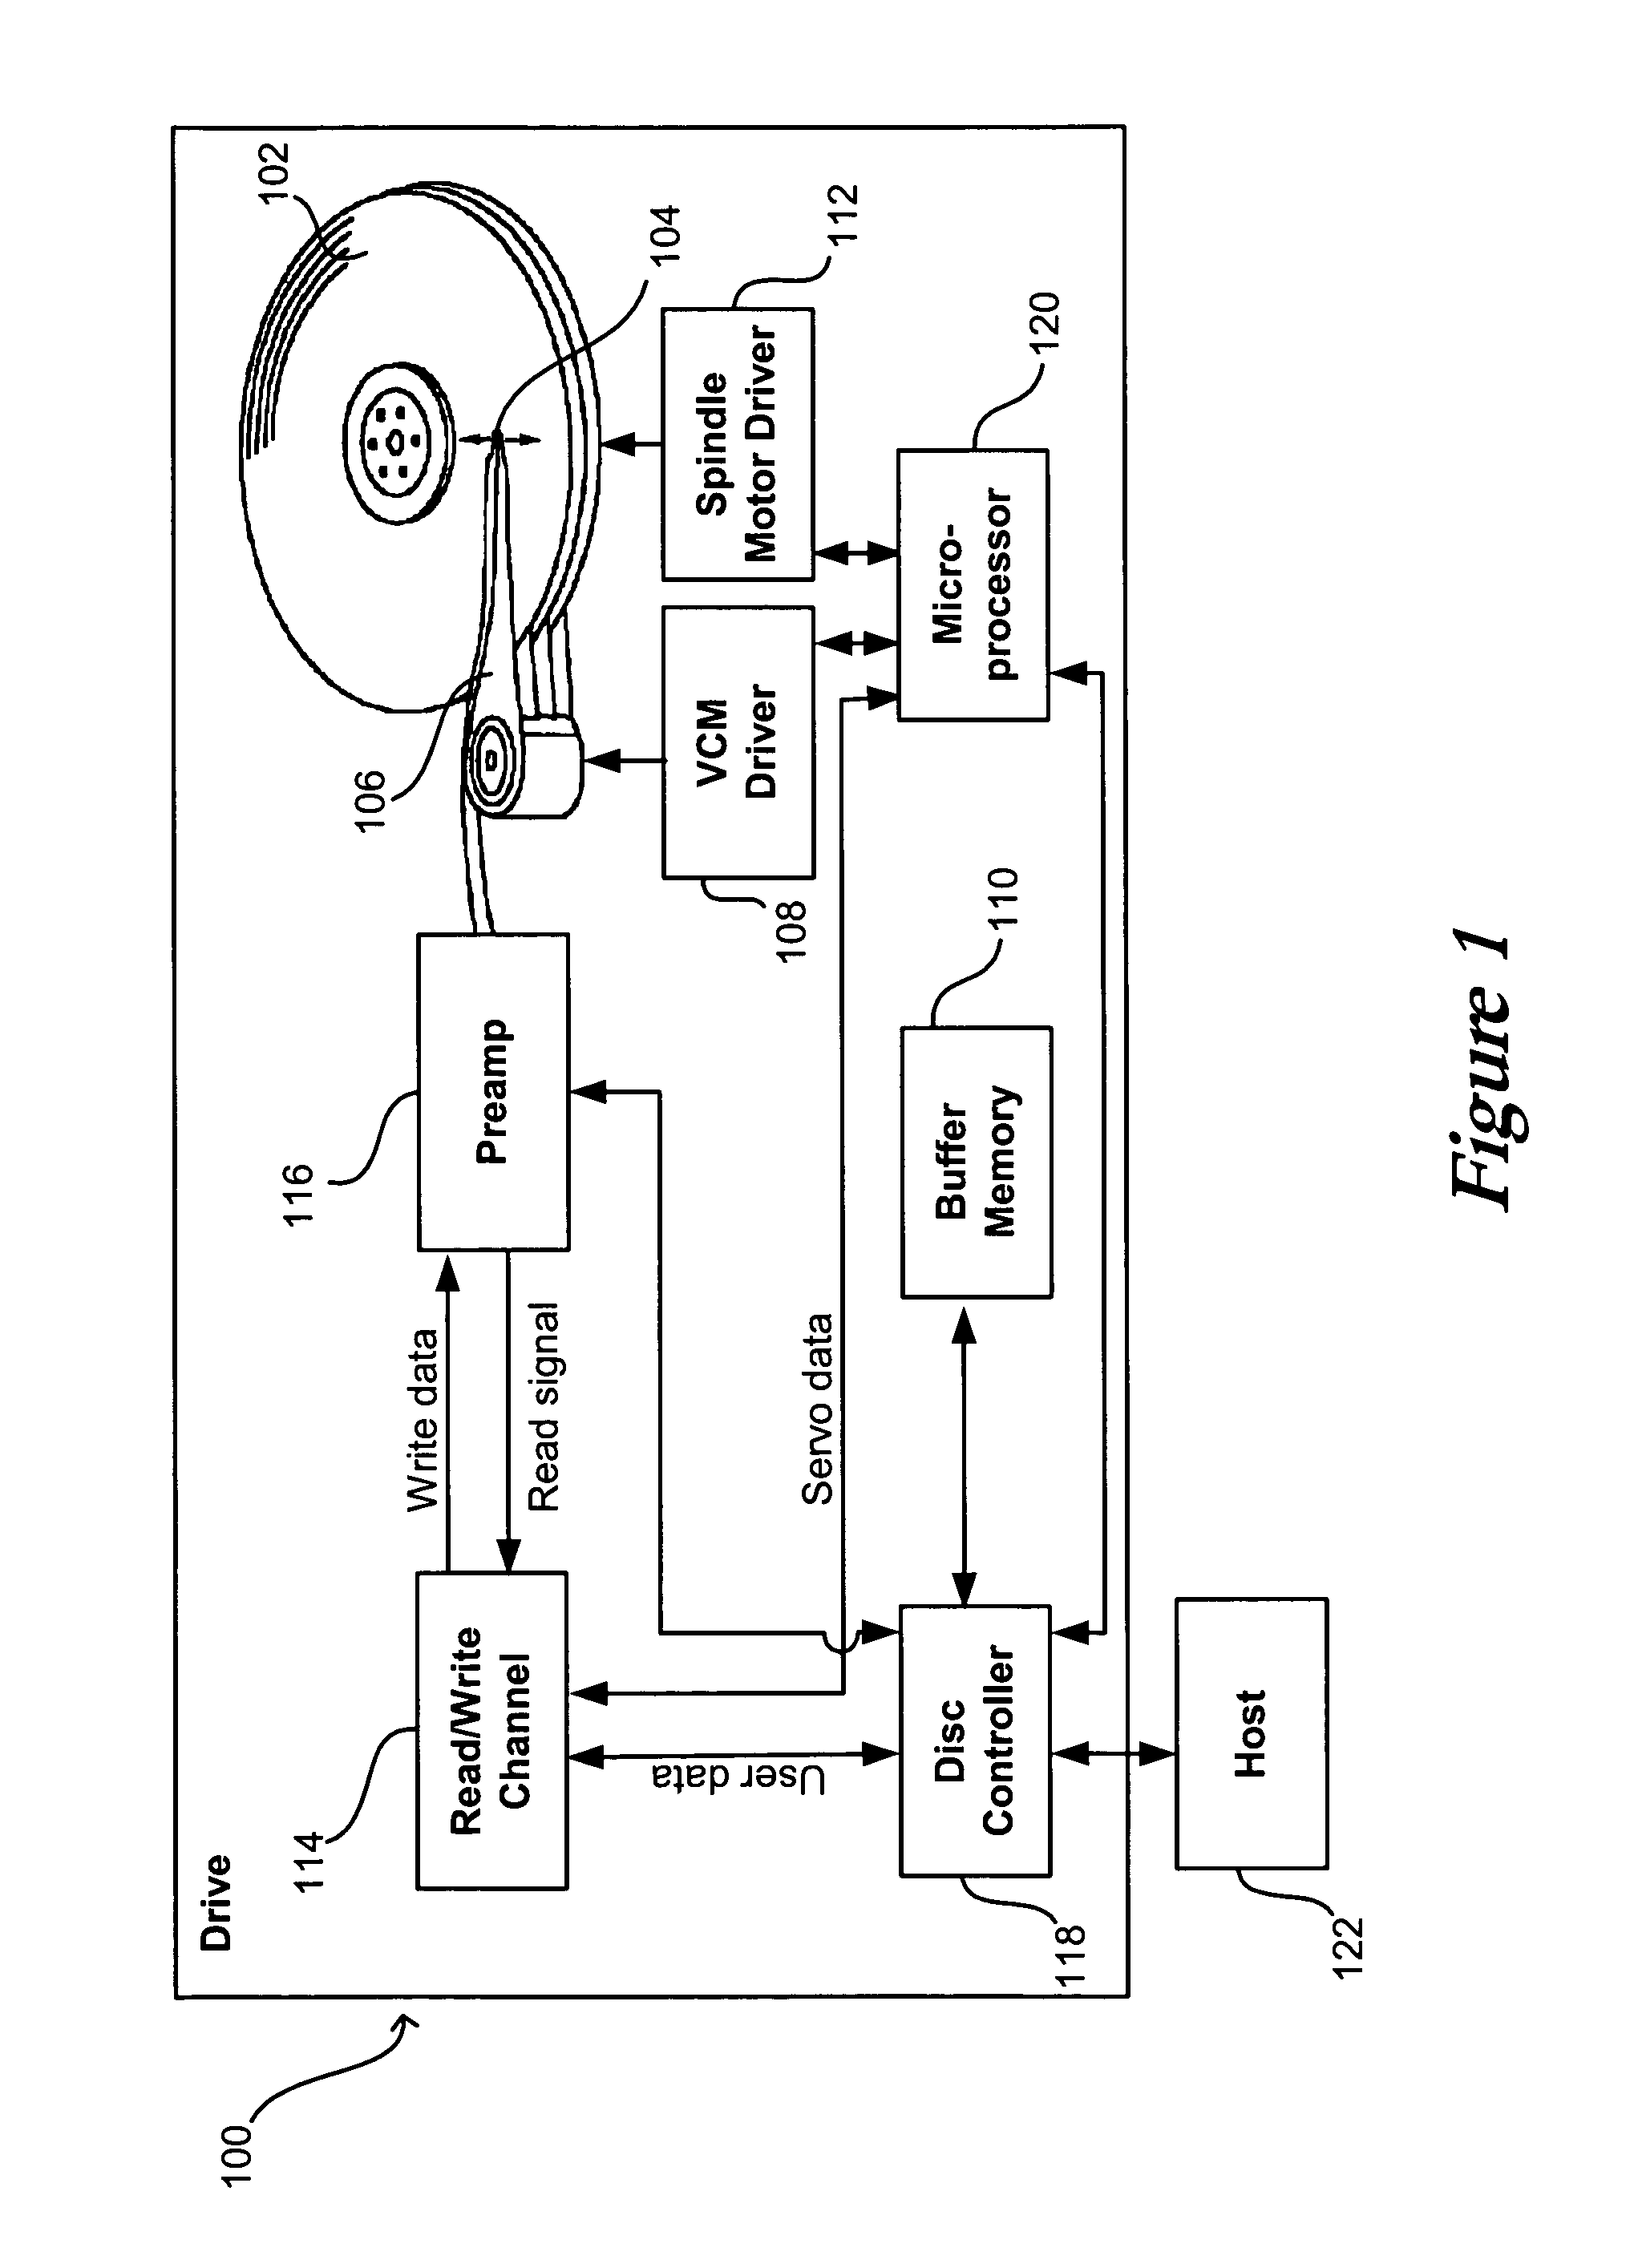 Methods using extended servo patterns with multi-pass servowriting and self-servowriting